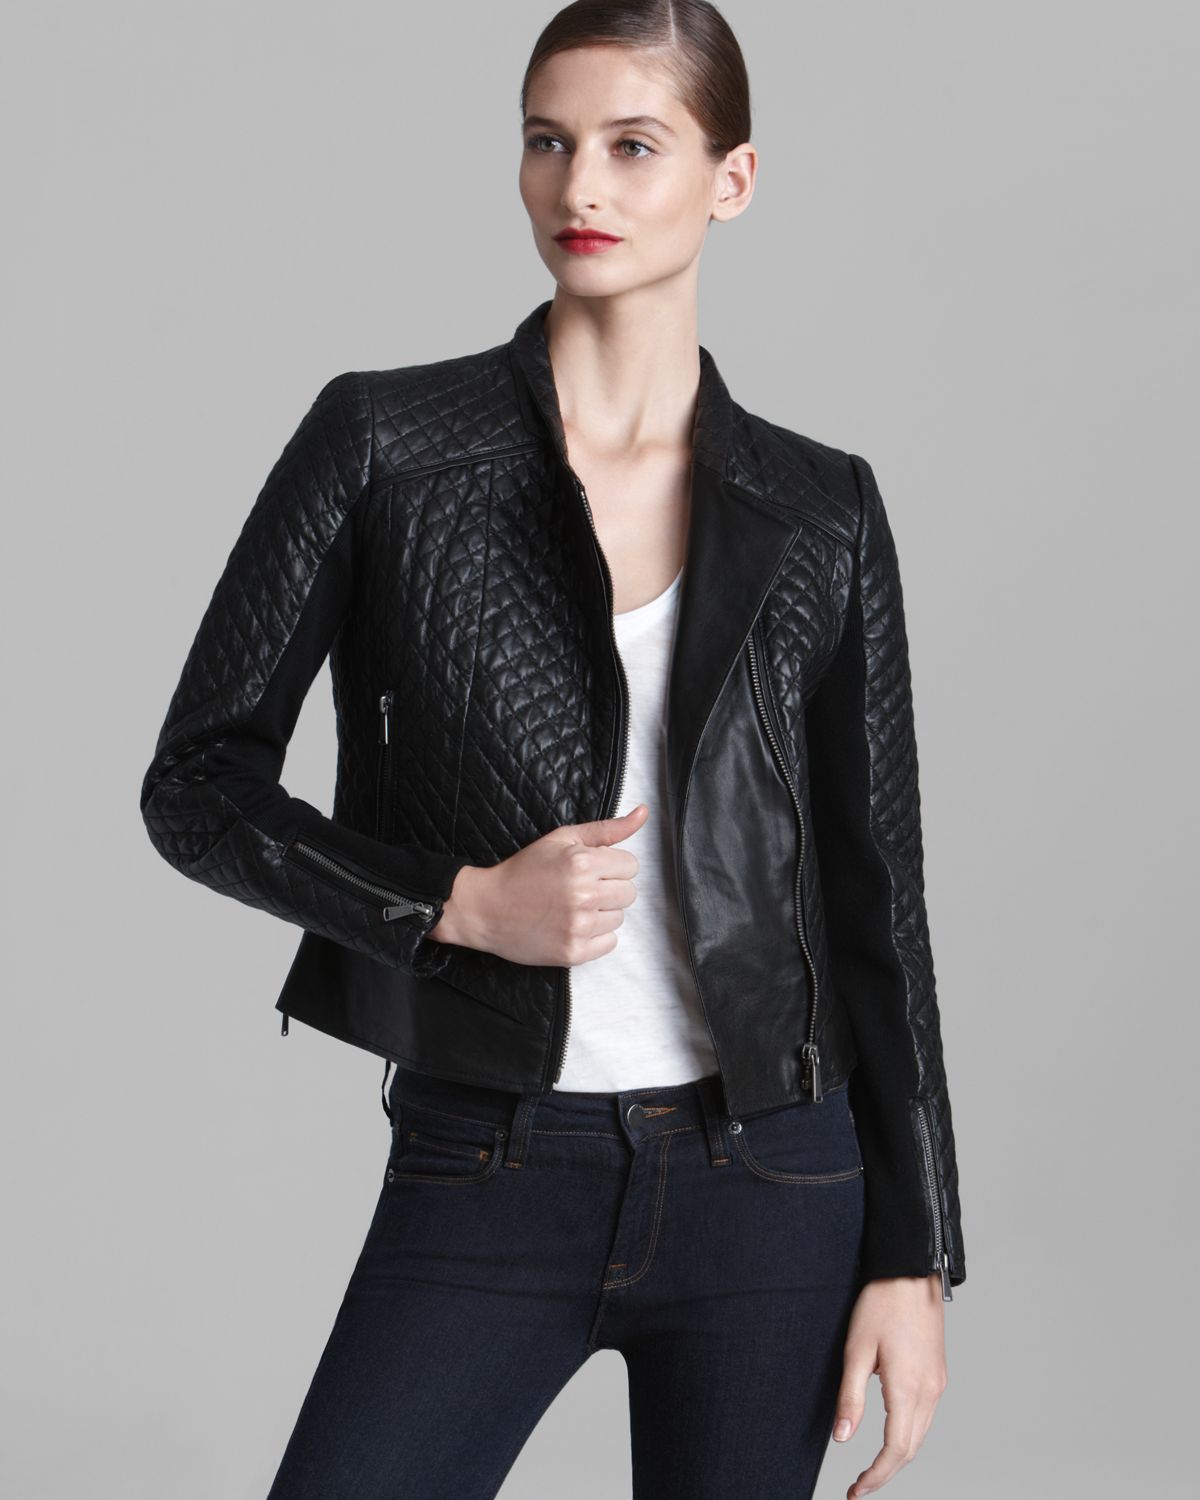 Lyst - Kors By Michael Kors Leather Jacket - Quilted Moto Asymmetric